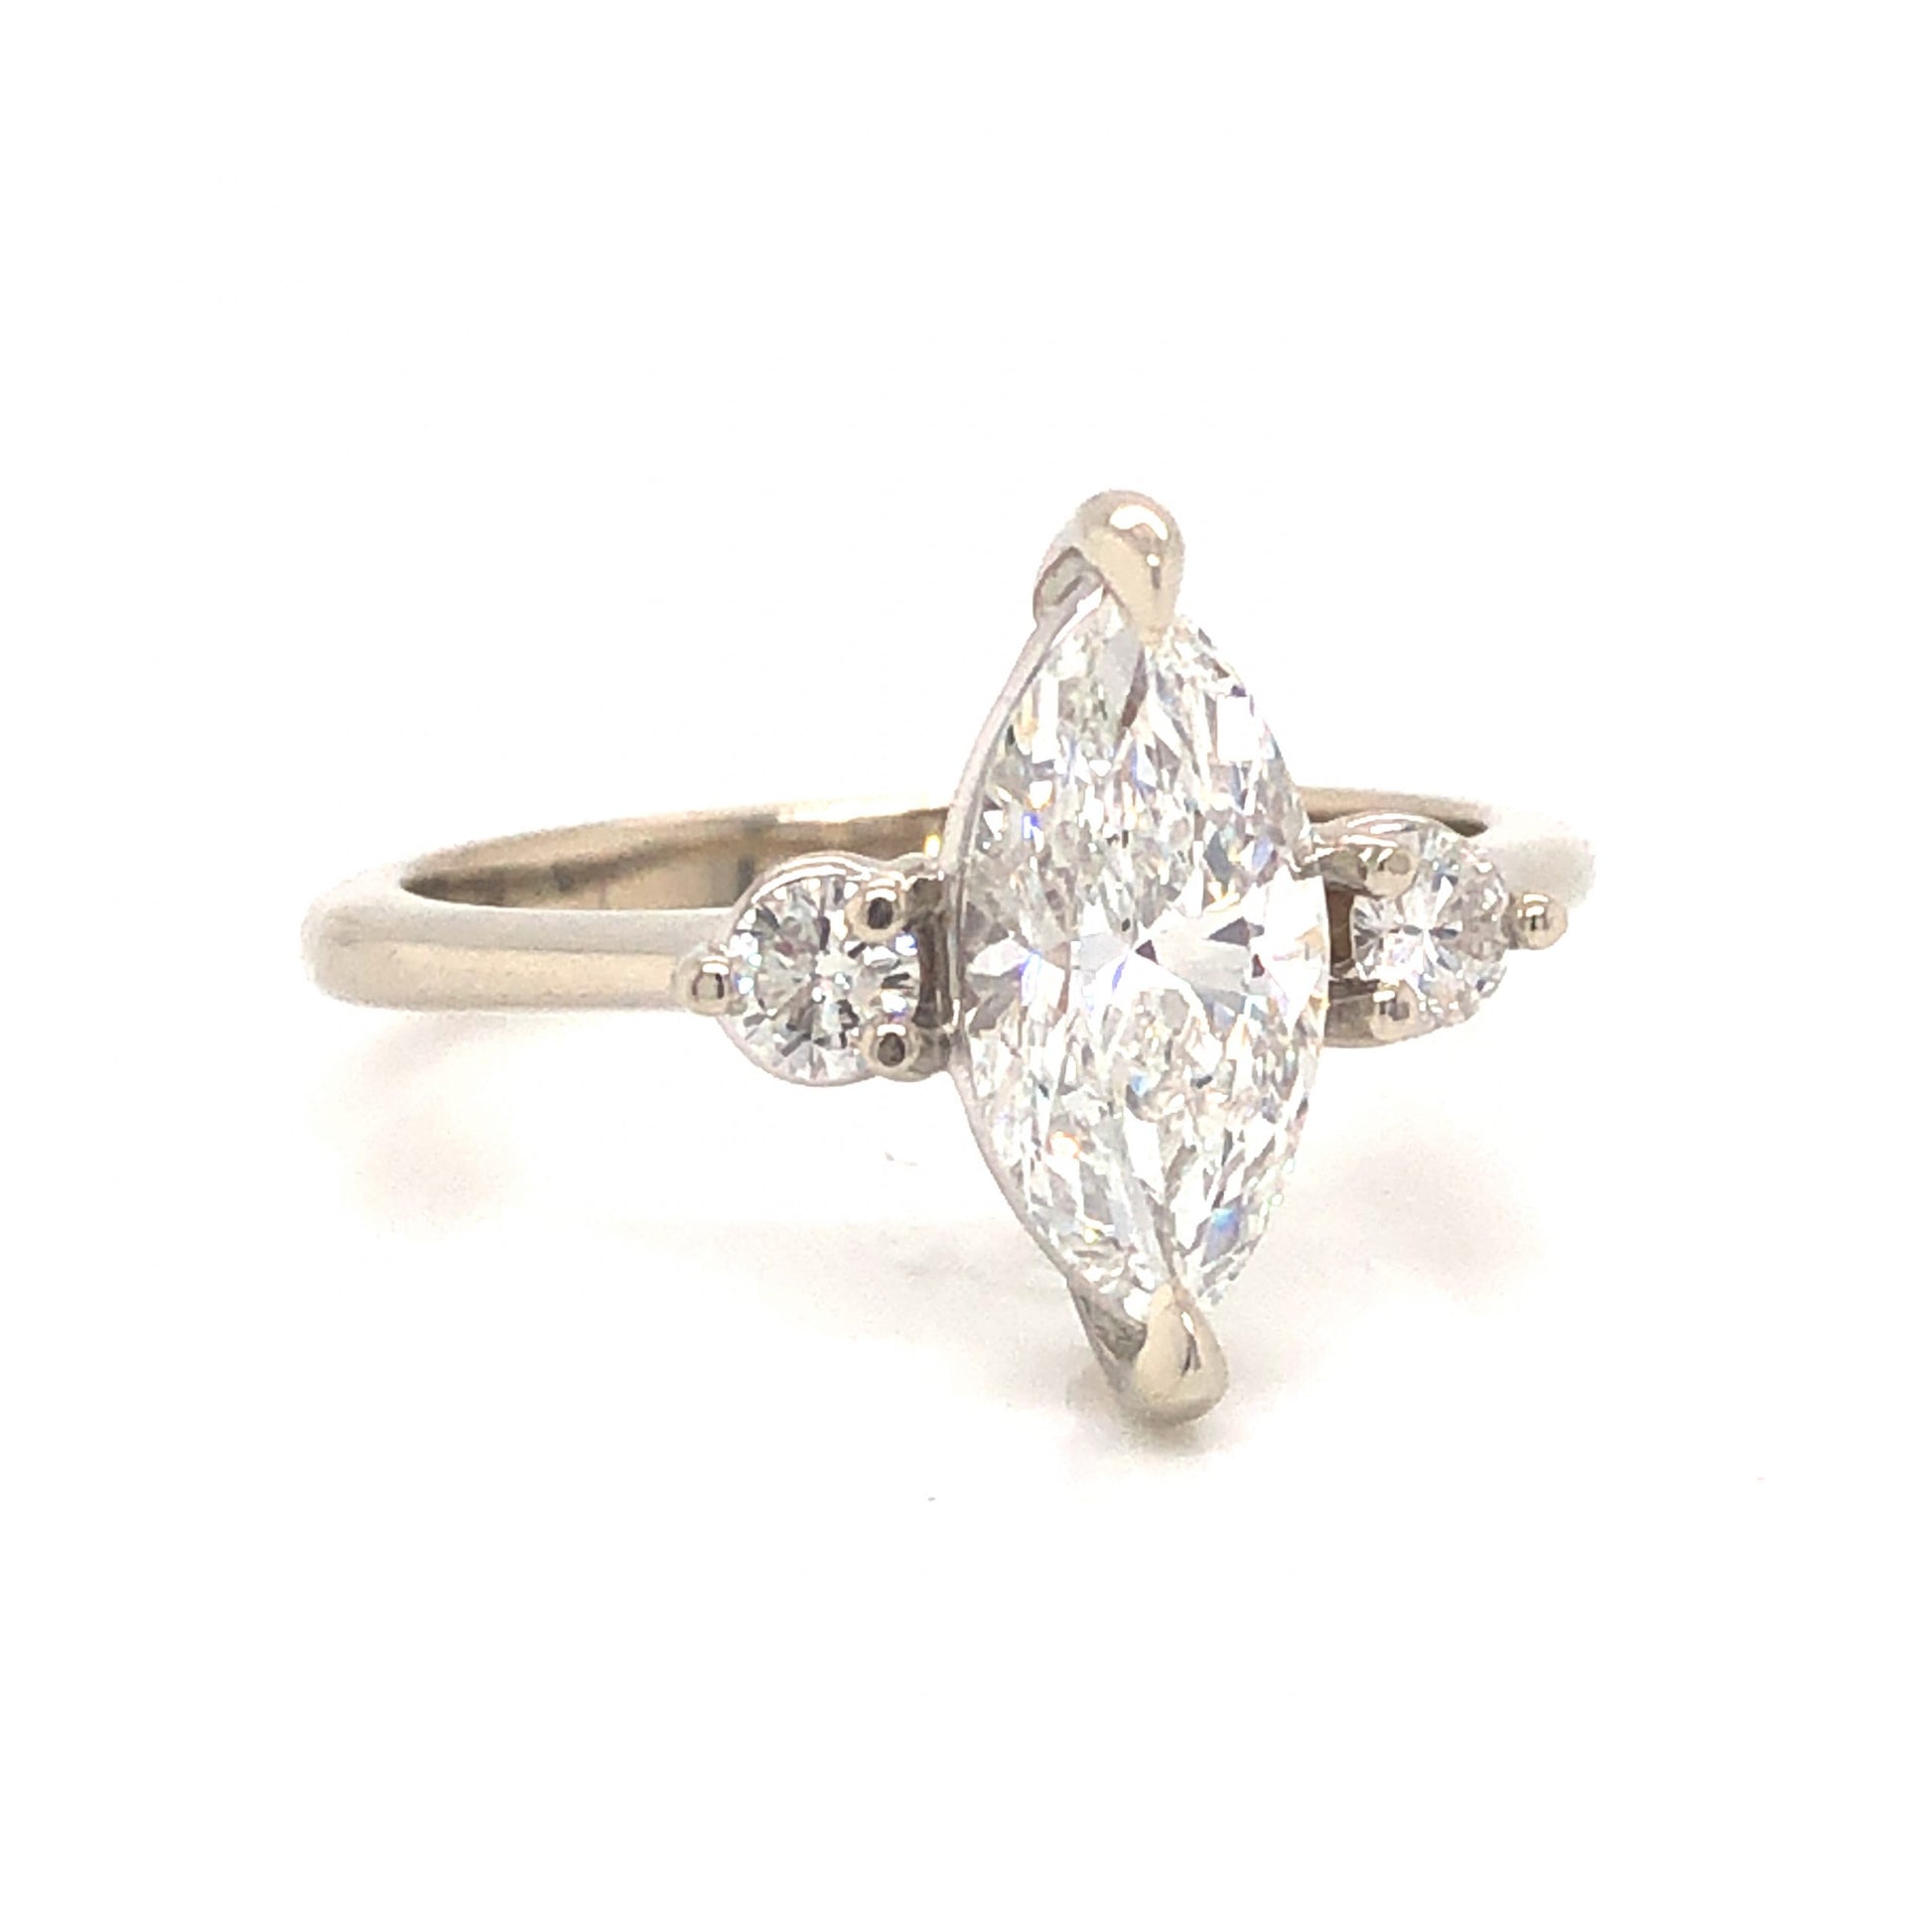 1.30 Marquise Diamond Engagement Ring in 14k White GoldComposition: Platinum Ring Size: 6.75 Total Diamond Weight: 1.50ct Total Gram Weight: 3.6 g Inscription: 14k
      